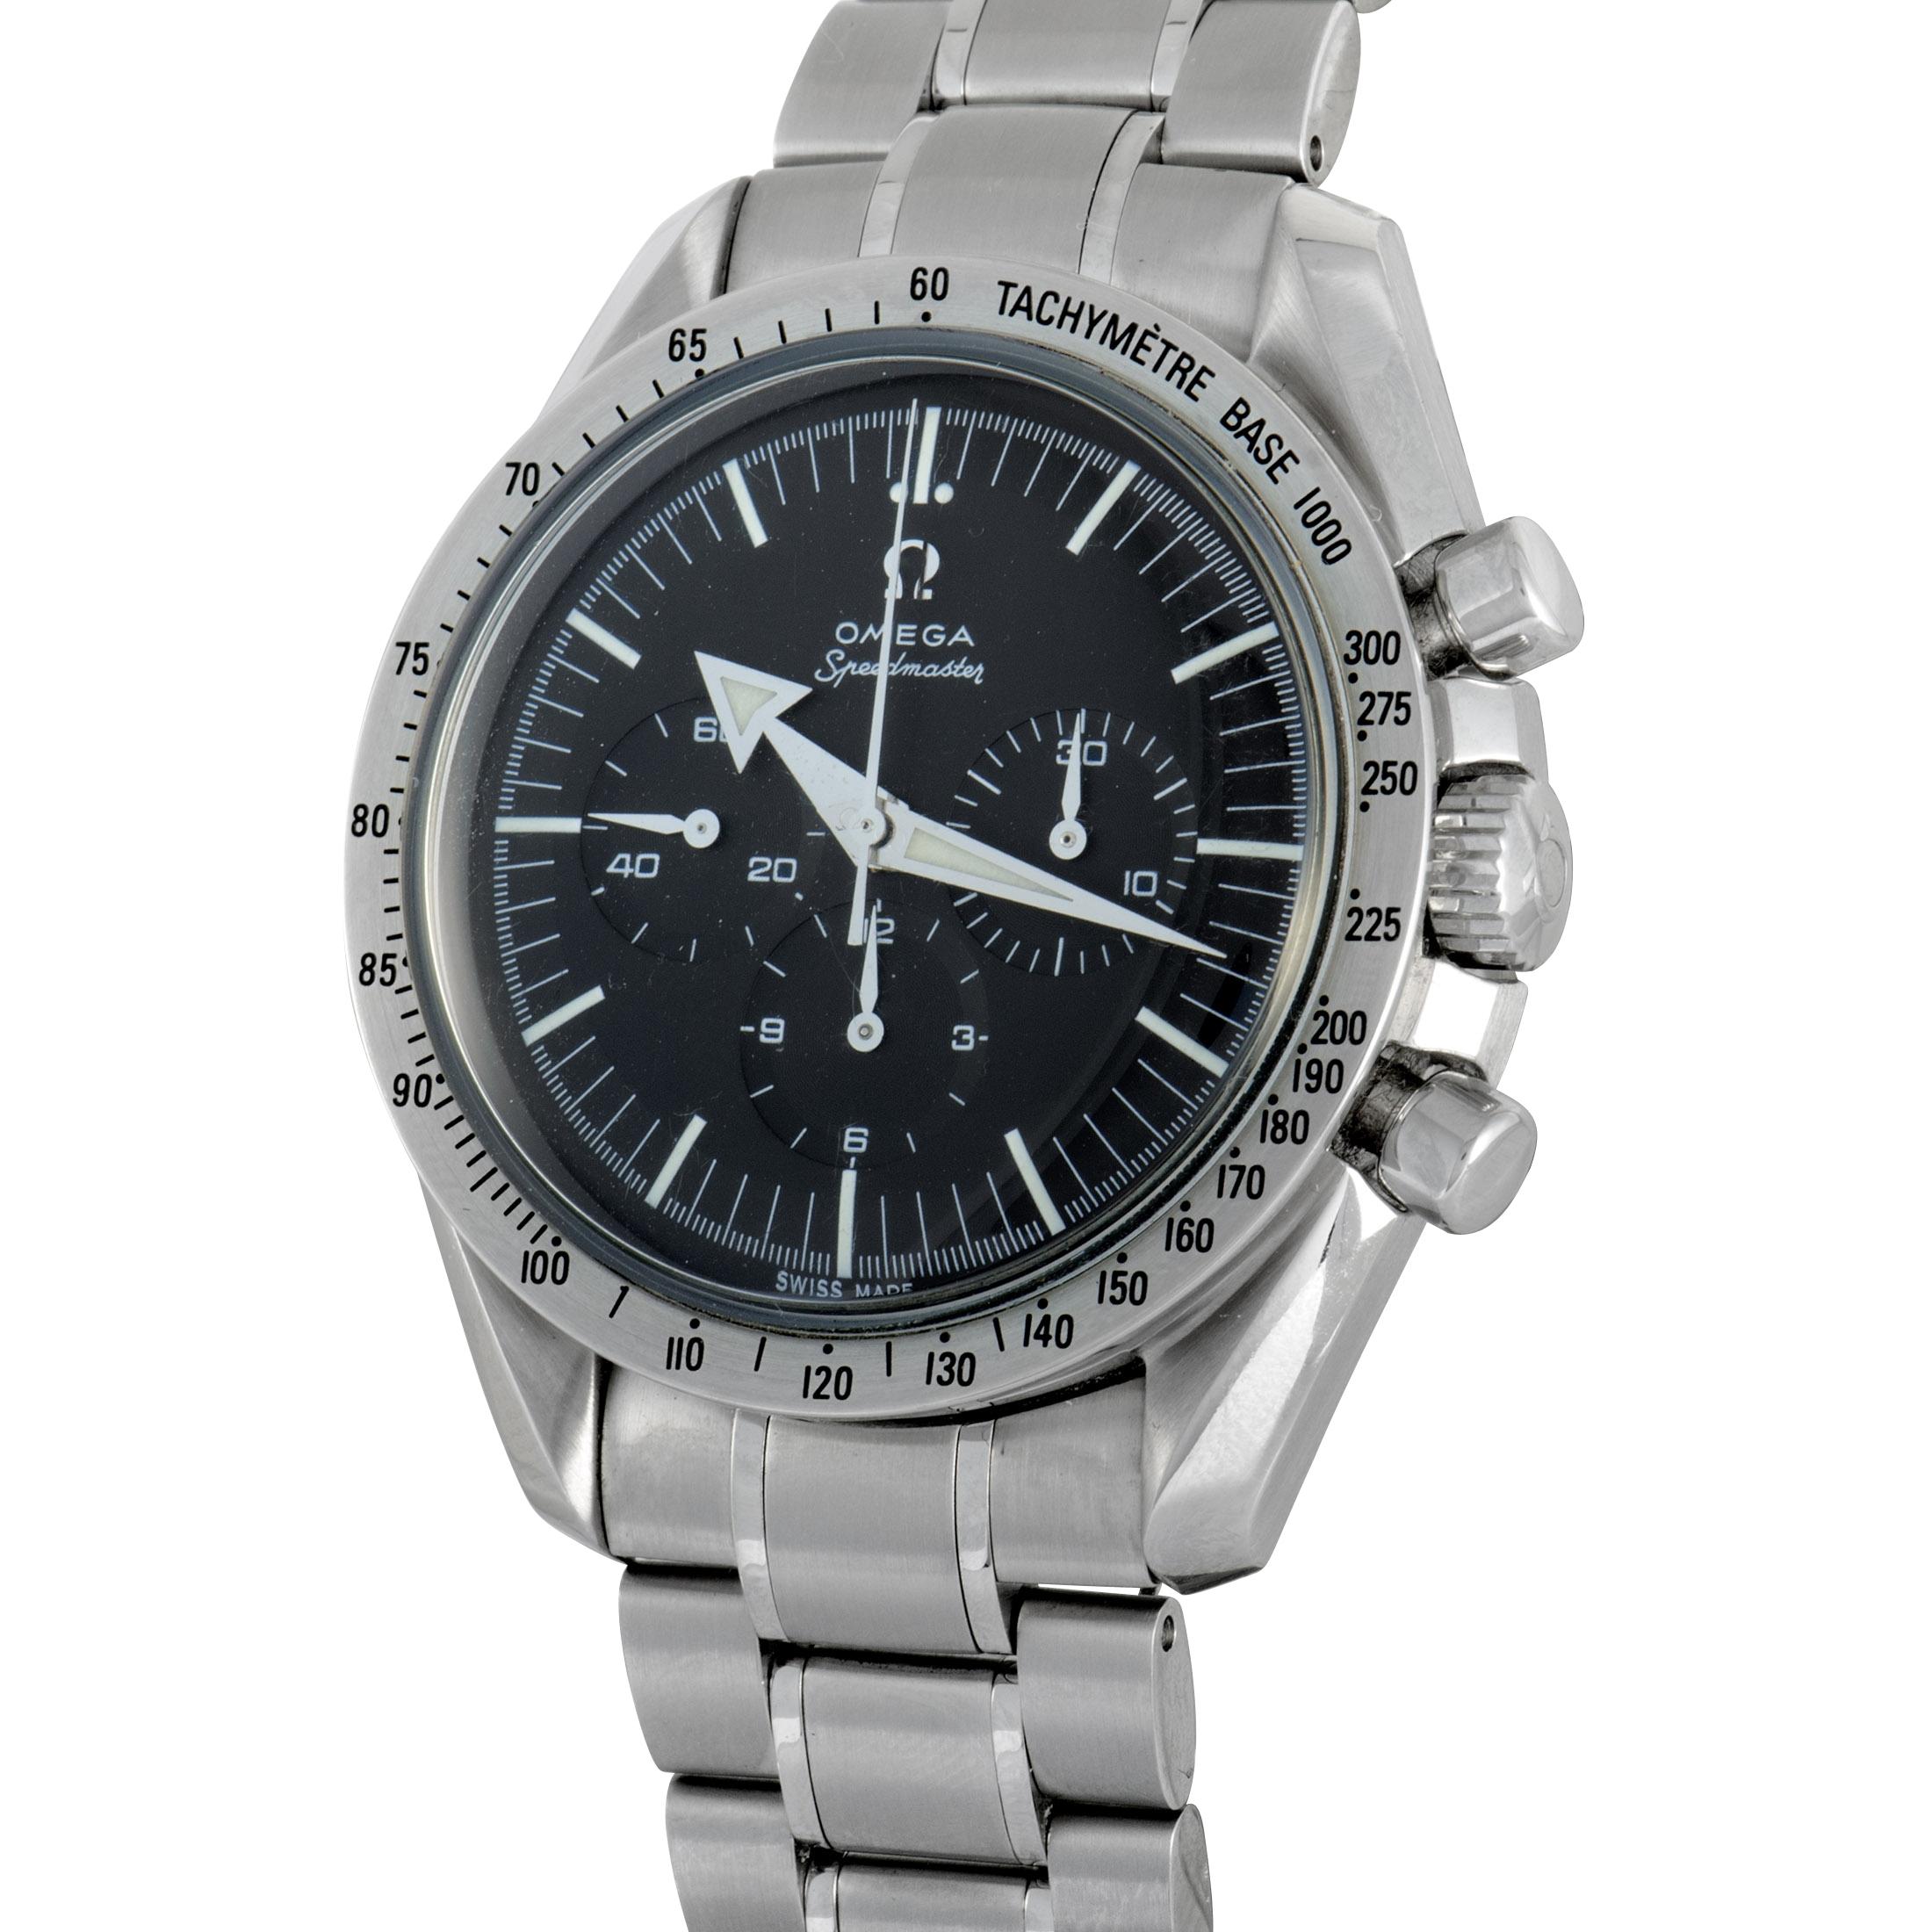 The Omega Speedmaster, reference number 3594.50, is presented with a 42 mm stainless steel case that is mounted onto a matching stainless steel bracelet, offering water resistance of 30 meters. Equipped with the Omega 1861 hand-wound movement that